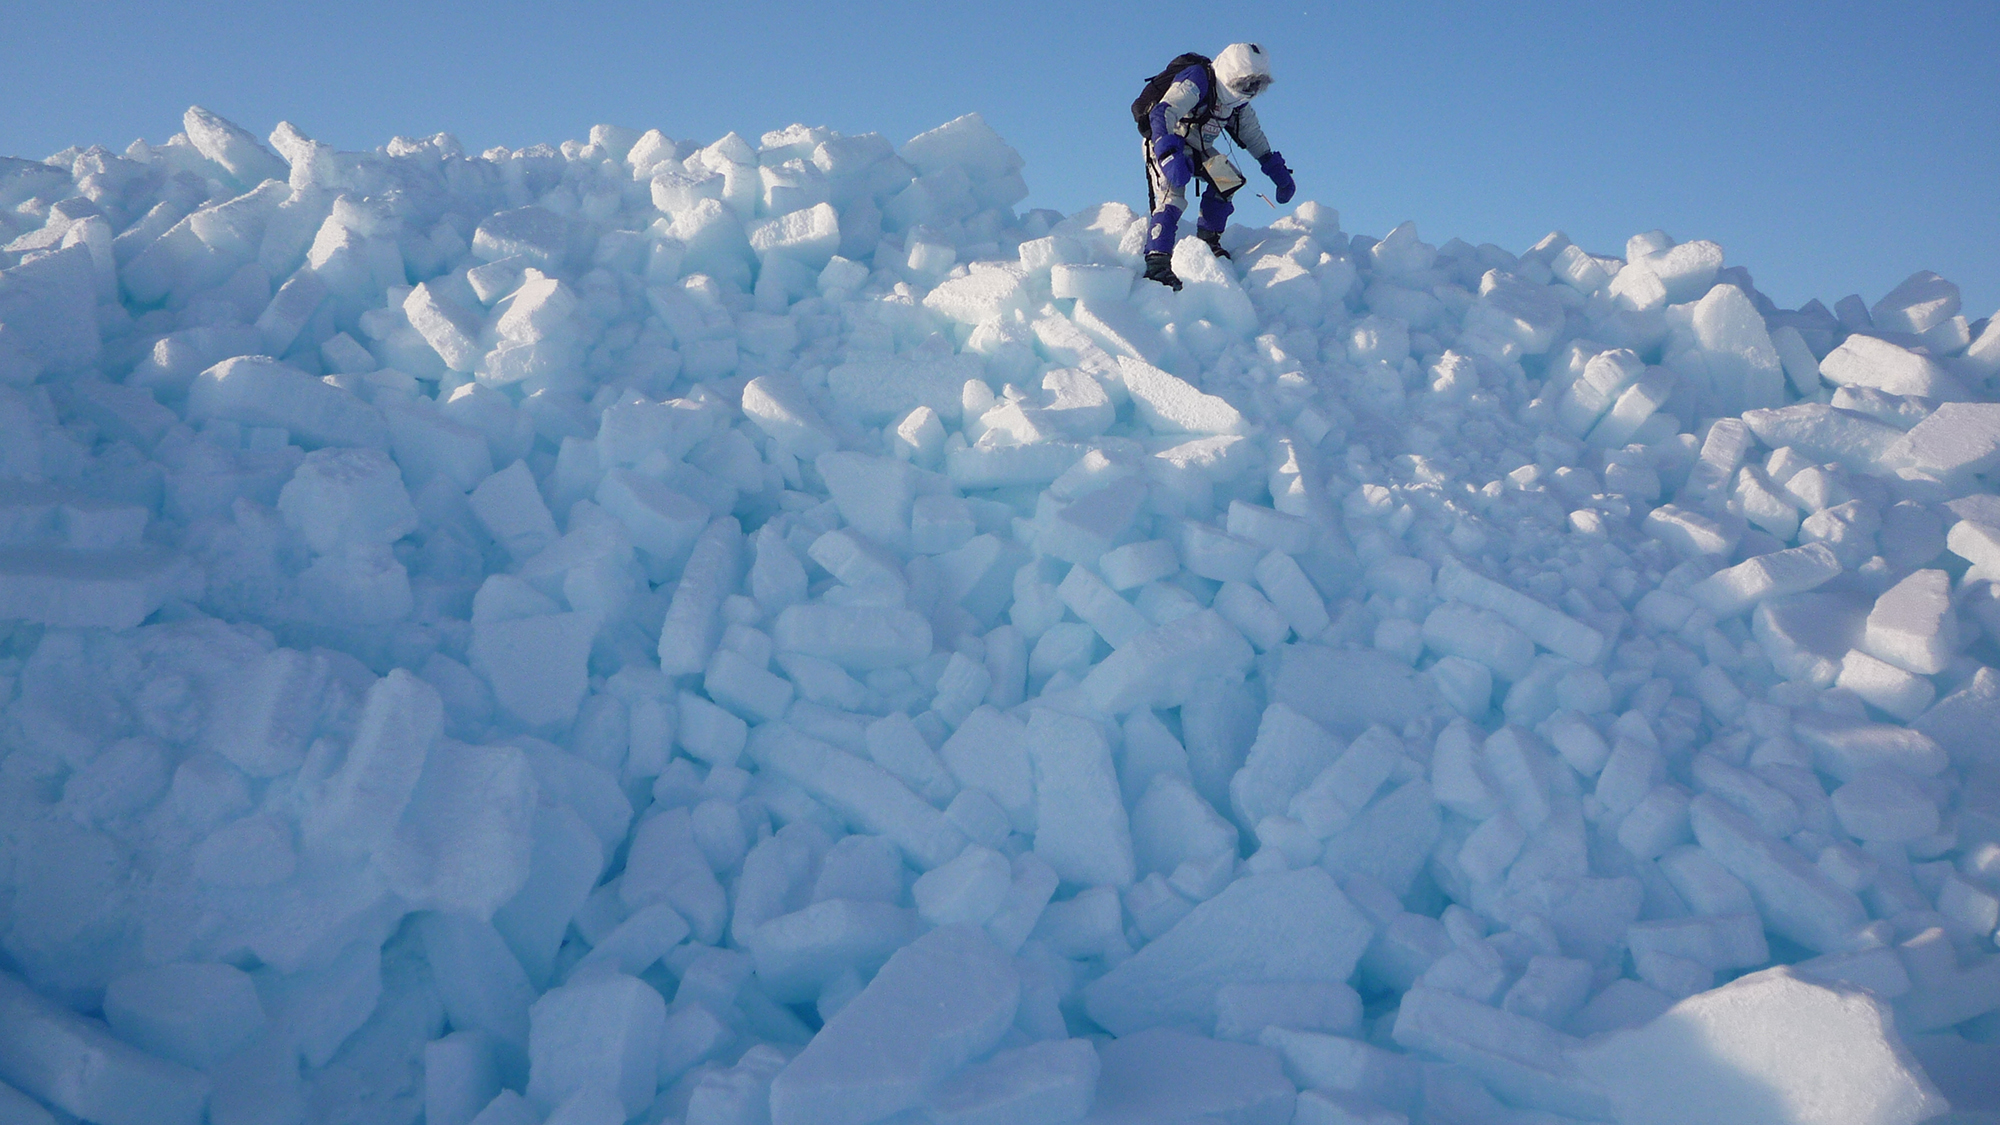 The epic landscapes near the geographic North Pole: collecting data on ice blocks, 2009; Martin Hartley